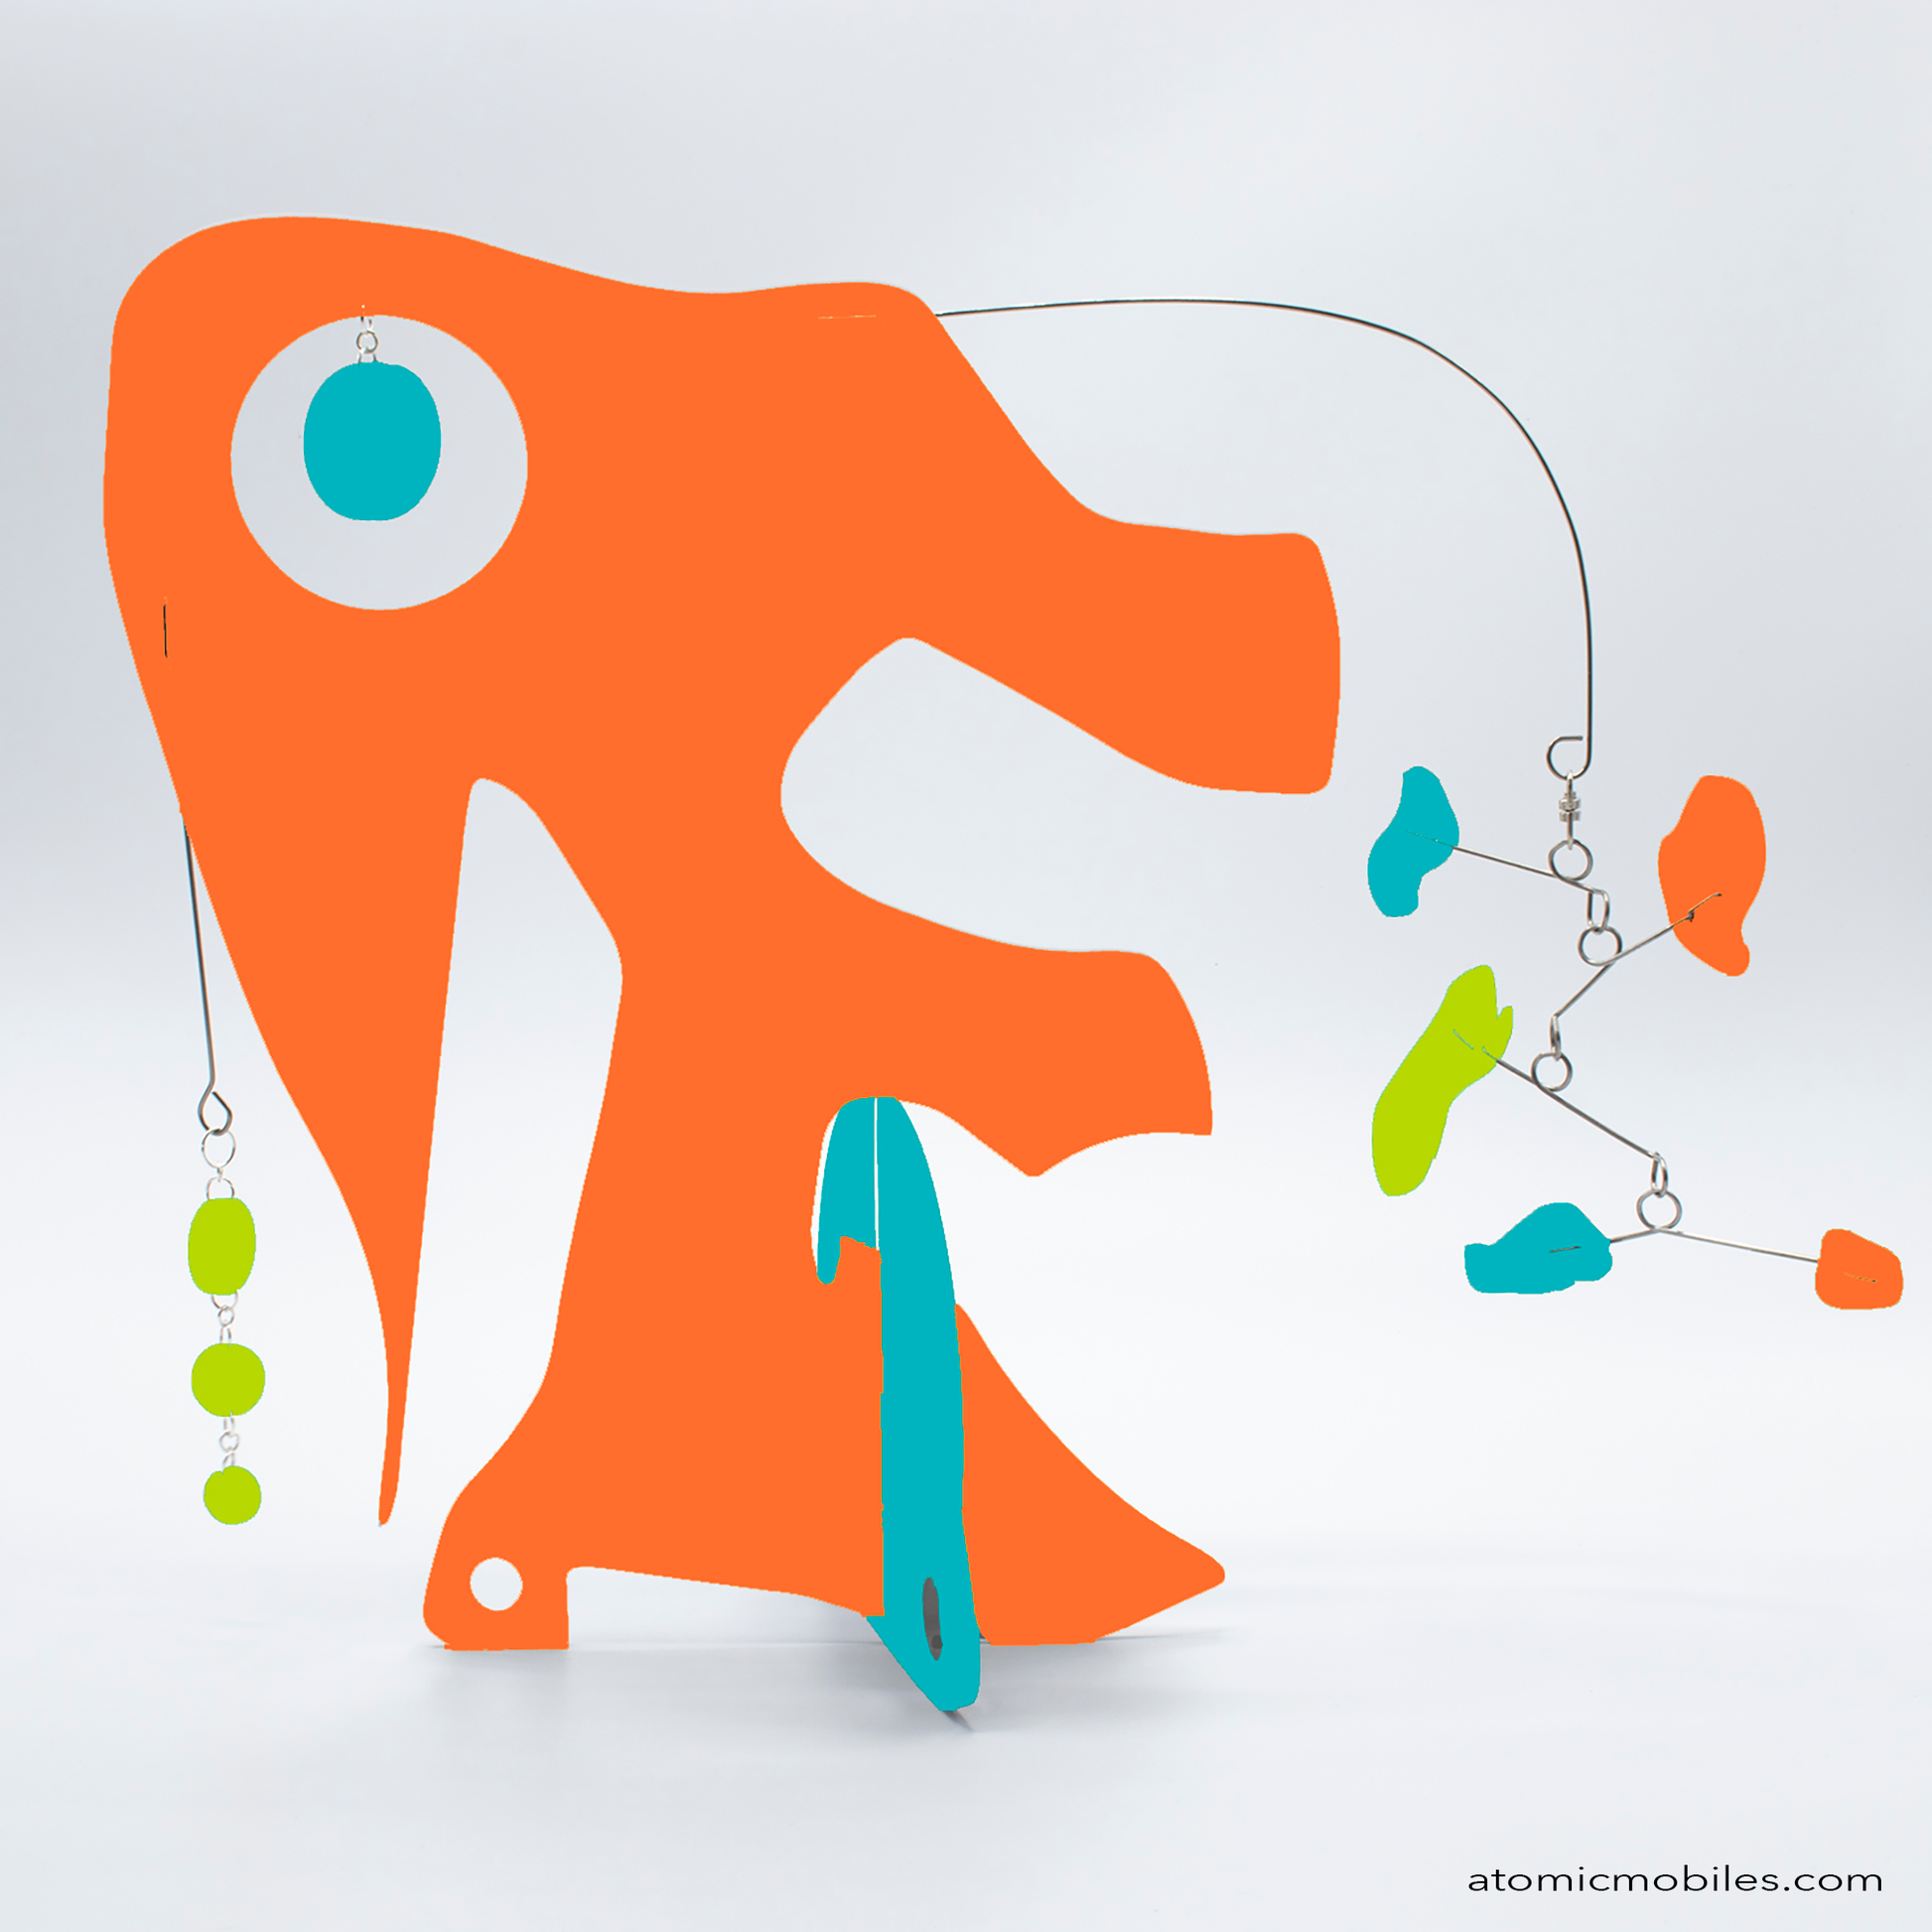 KinetiCats Collection Elephant in Orange, Aqua, and Lime Green - one of 12 Modern Cute Abstract Animal Art Sculpture Kinetic Stabiles inspired by Dada and mid century modern style art by AtomicMobiles.com